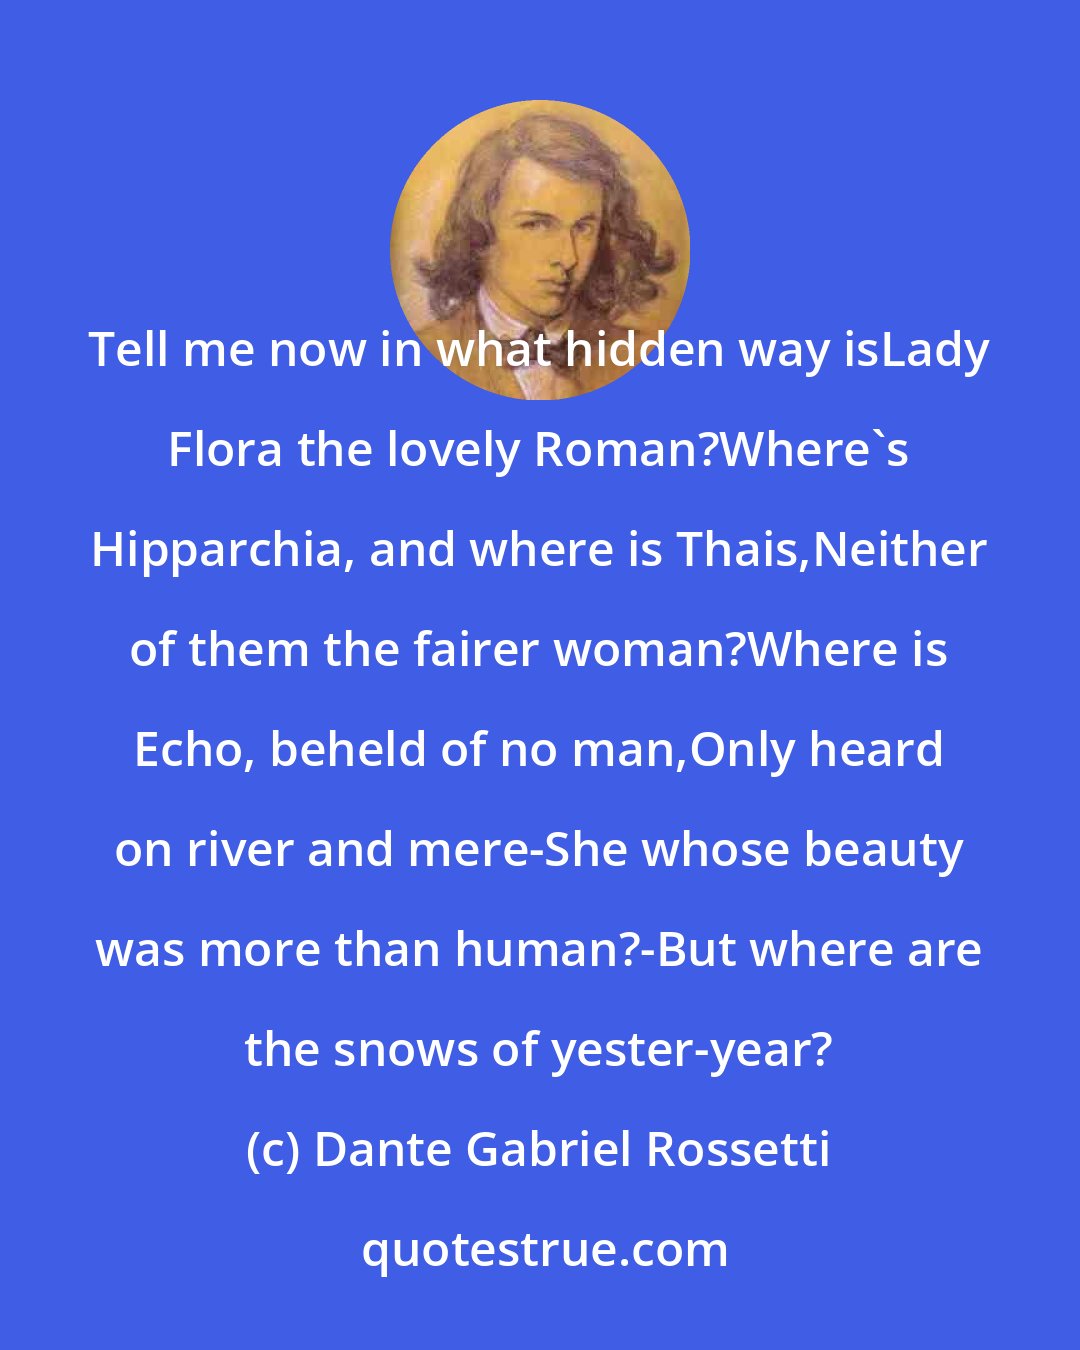 Dante Gabriel Rossetti: Tell me now in what hidden way isLady Flora the lovely Roman?Where's Hipparchia, and where is Thais,Neither of them the fairer woman?Where is Echo, beheld of no man,Only heard on river and mere-She whose beauty was more than human?-But where are the snows of yester-year?